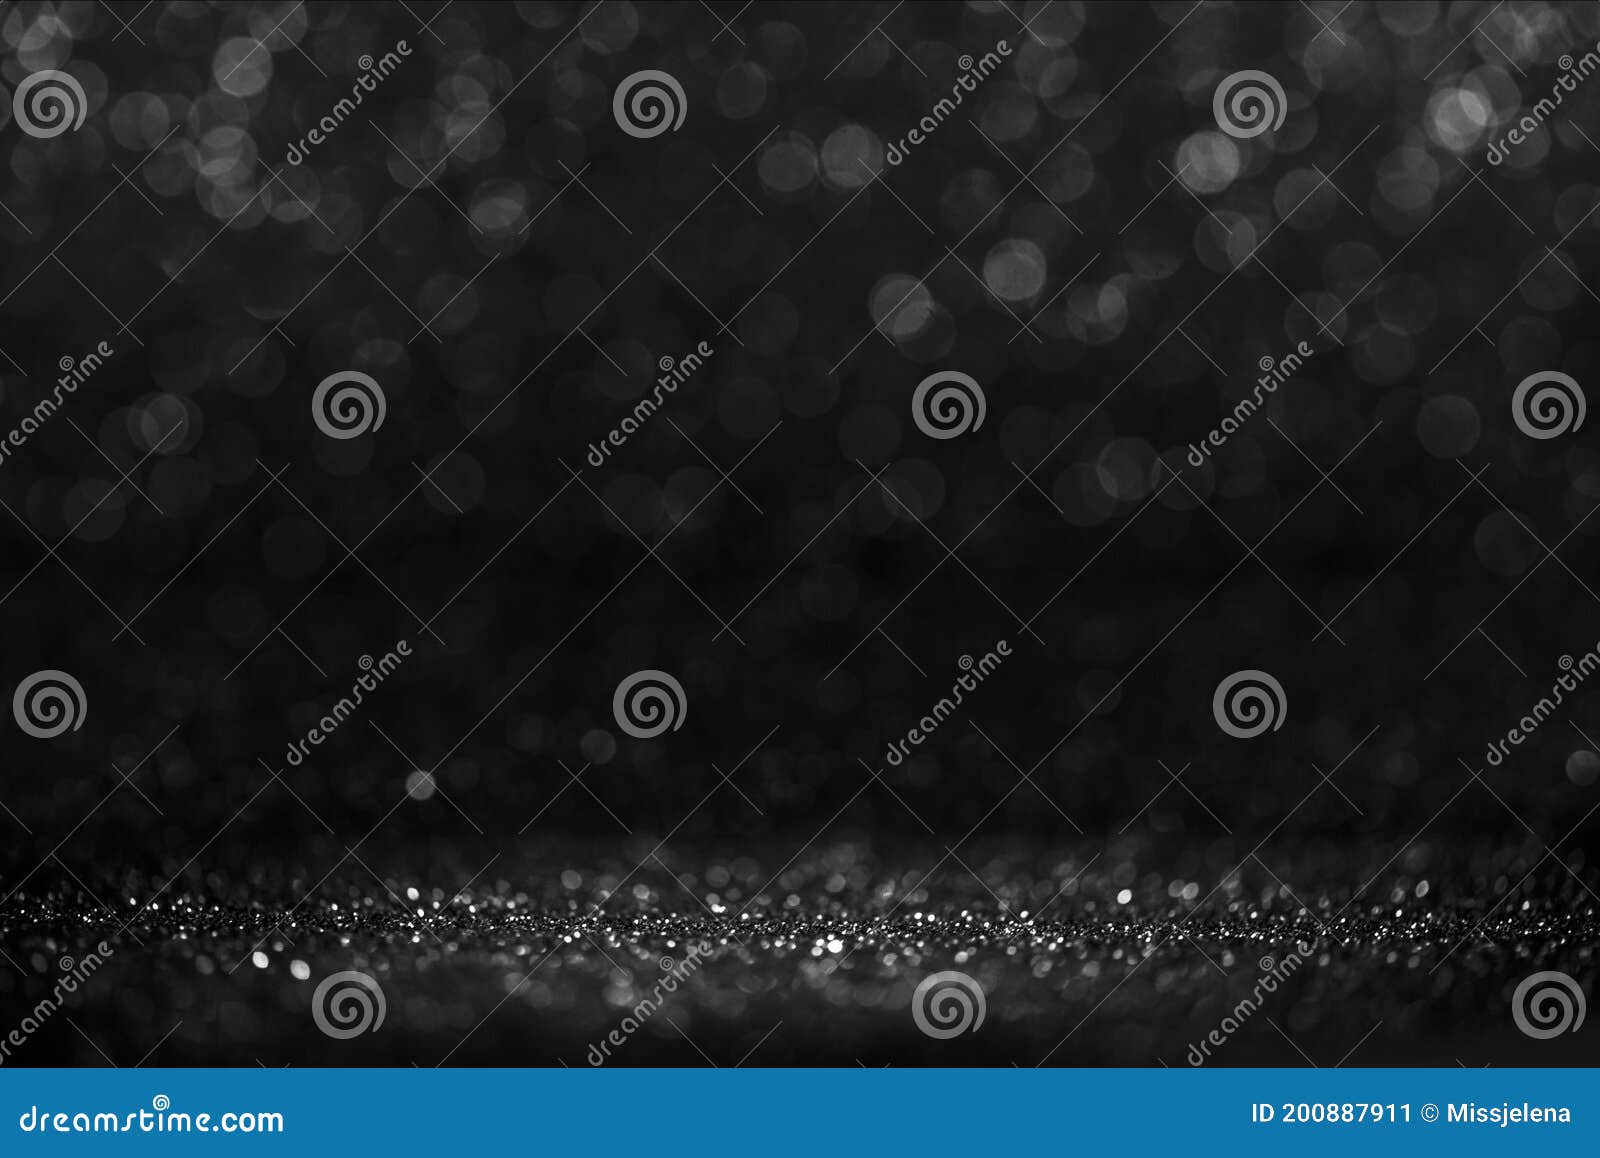 black friday bokeh background. elegant dark blur layout . silver and black glitter place on table with spotlight. luxury